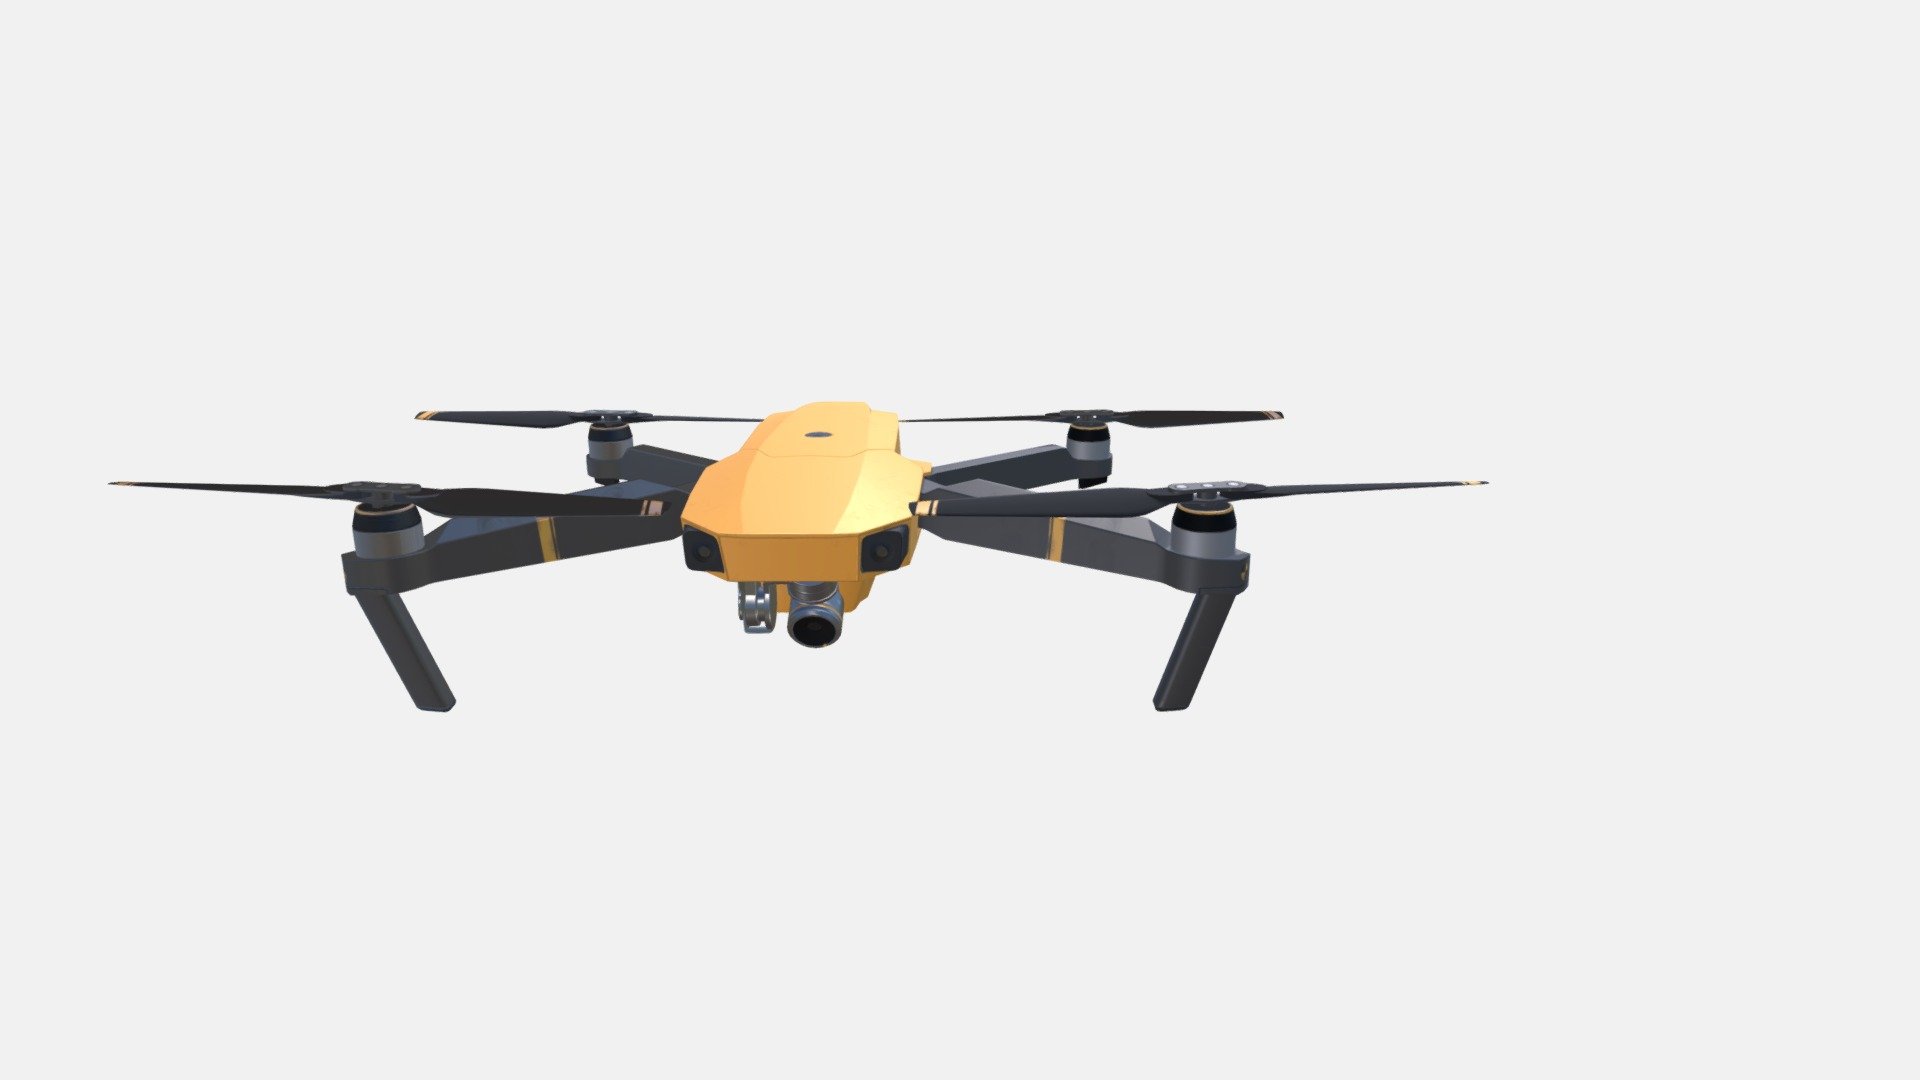 This is a low-poly 3D model. The design of the model is based on a DJI Mavic Pro drone 3d model